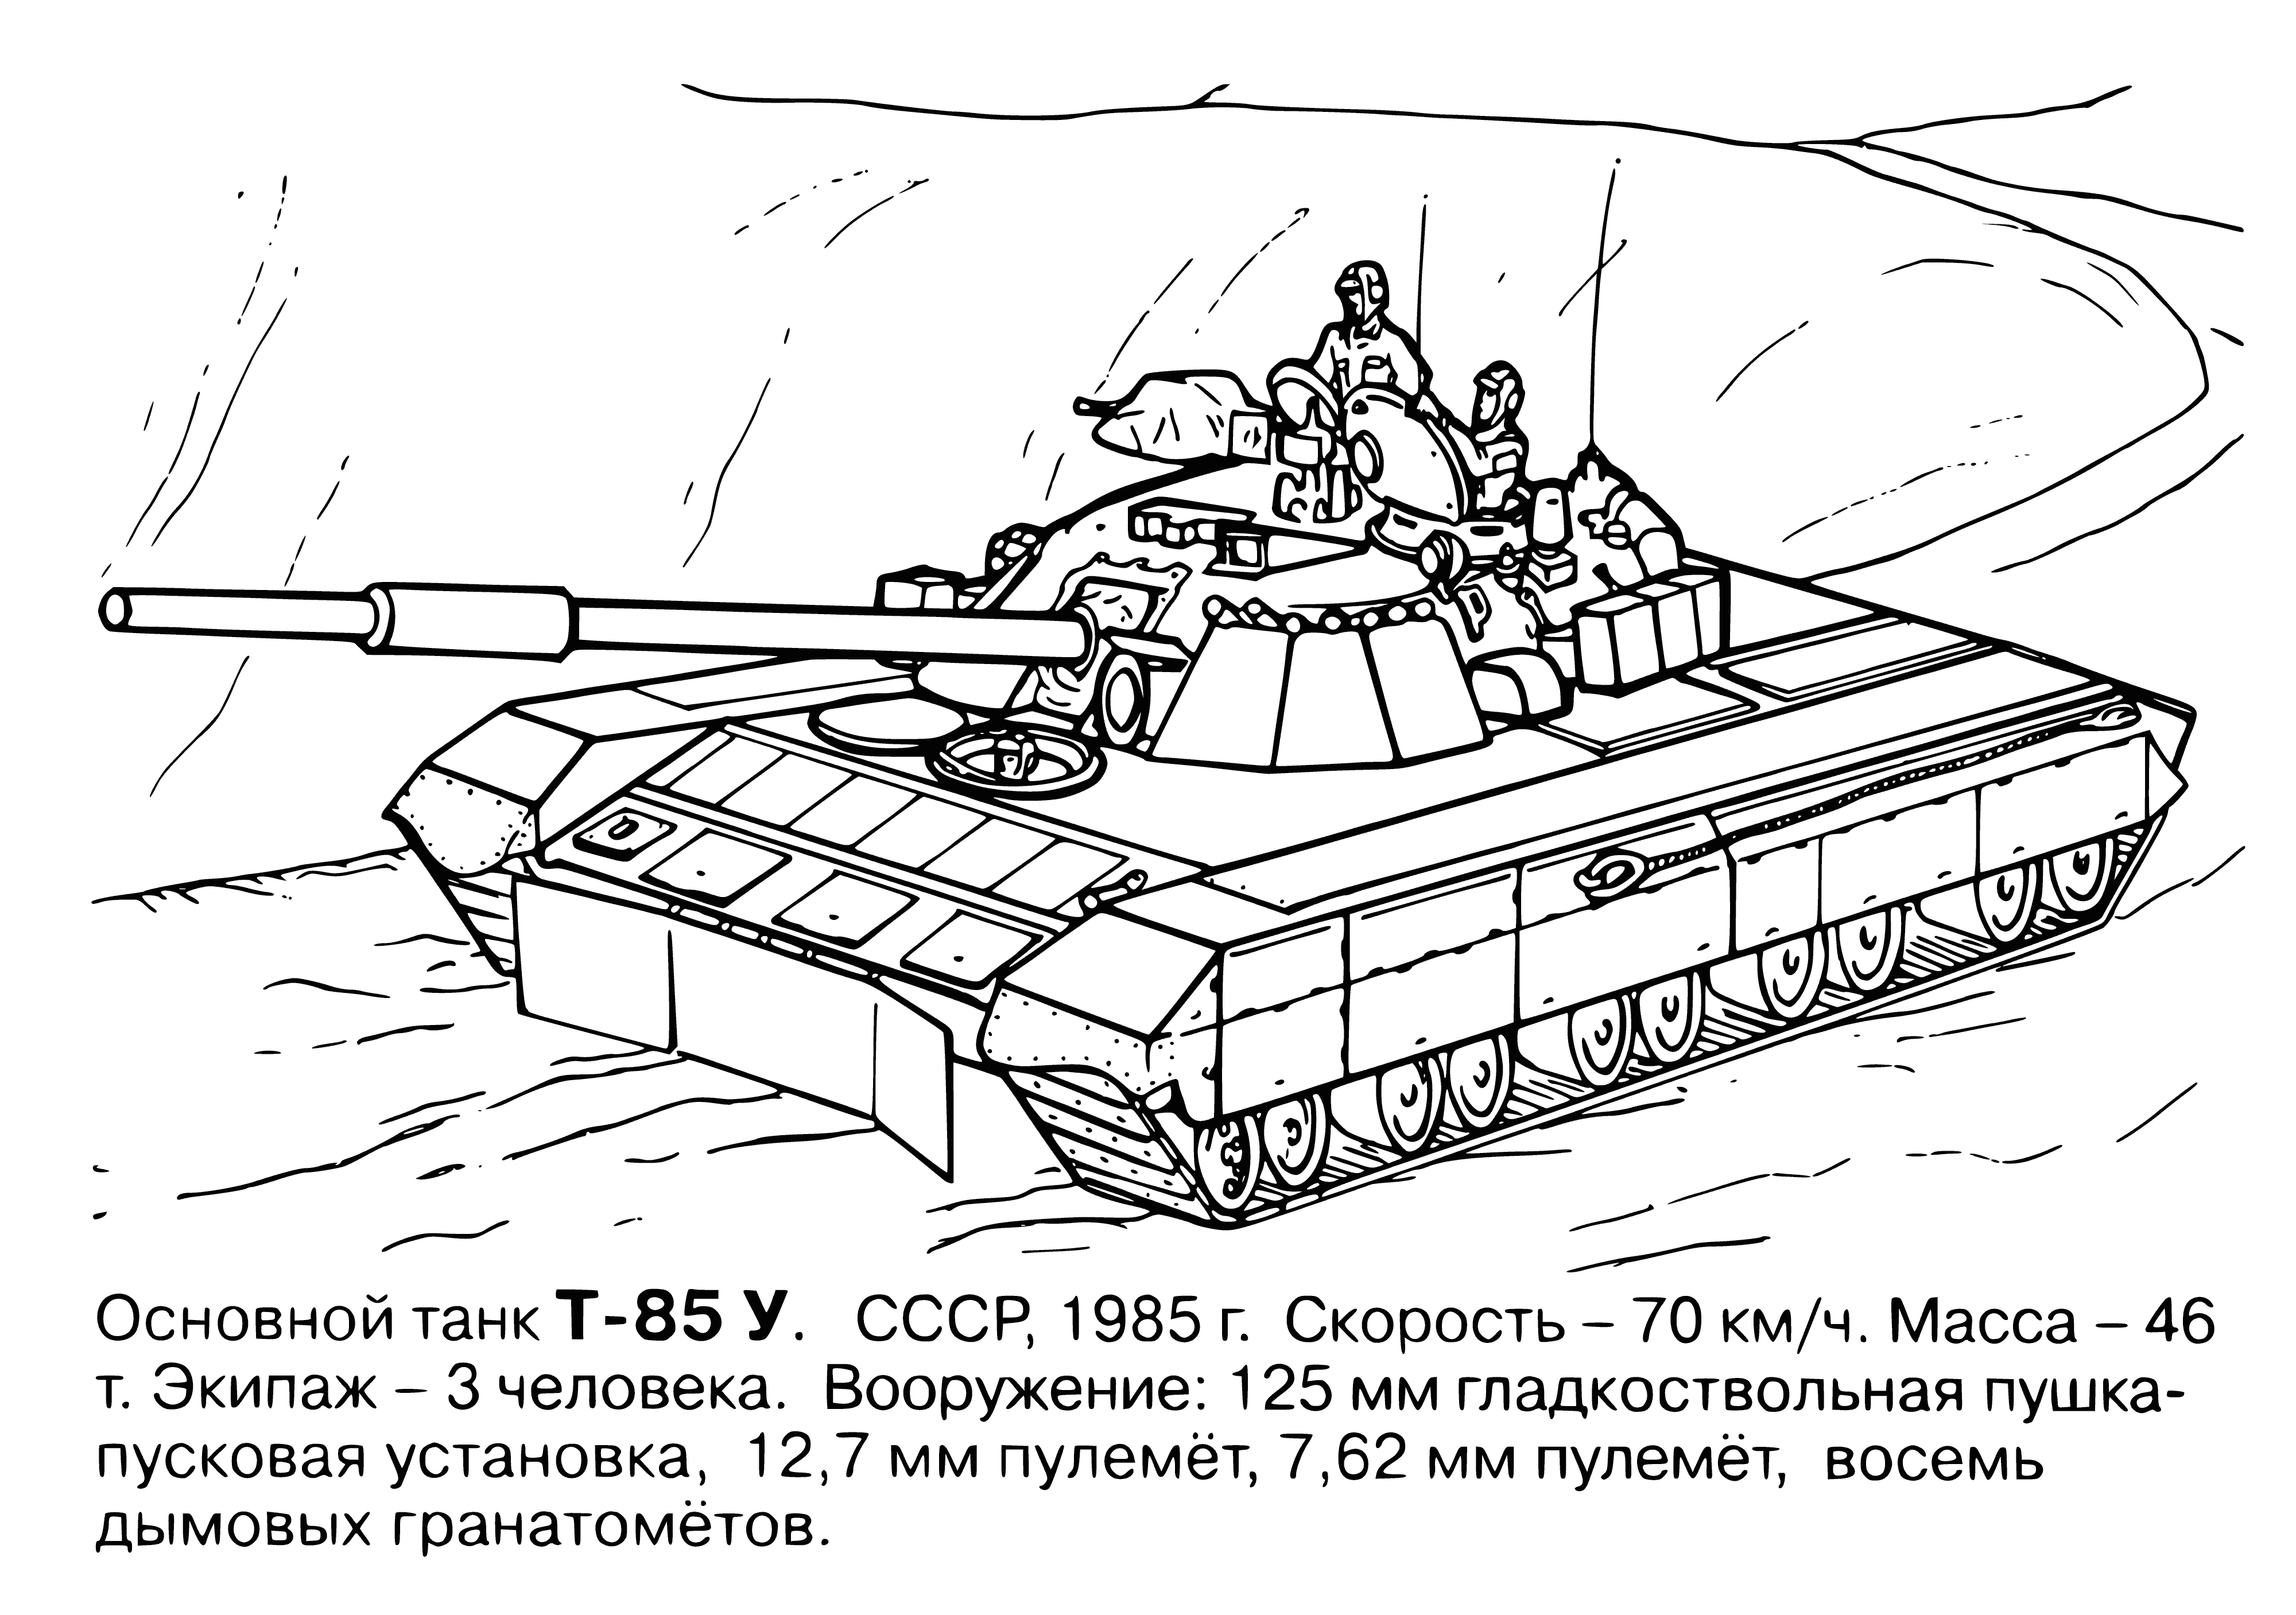 coloring page: The T-85 is a Russian main battle tank from 1985, armed with 125mm gun + two machine guns & powered by V-46 diesel engine. Crew of 3.